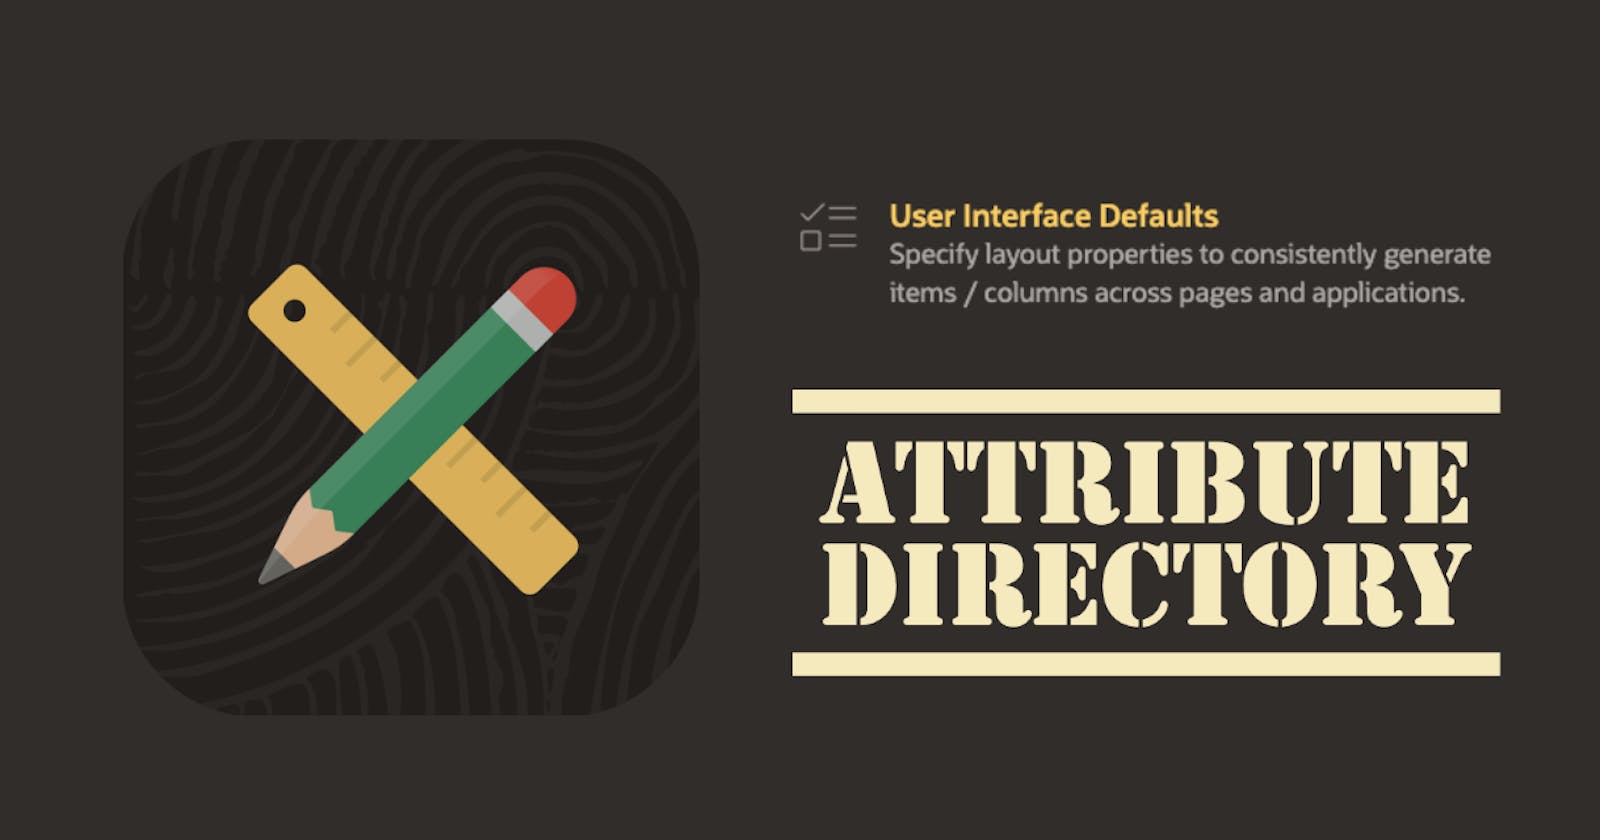 Improve UI Consistency with APEX User Interface Defaults